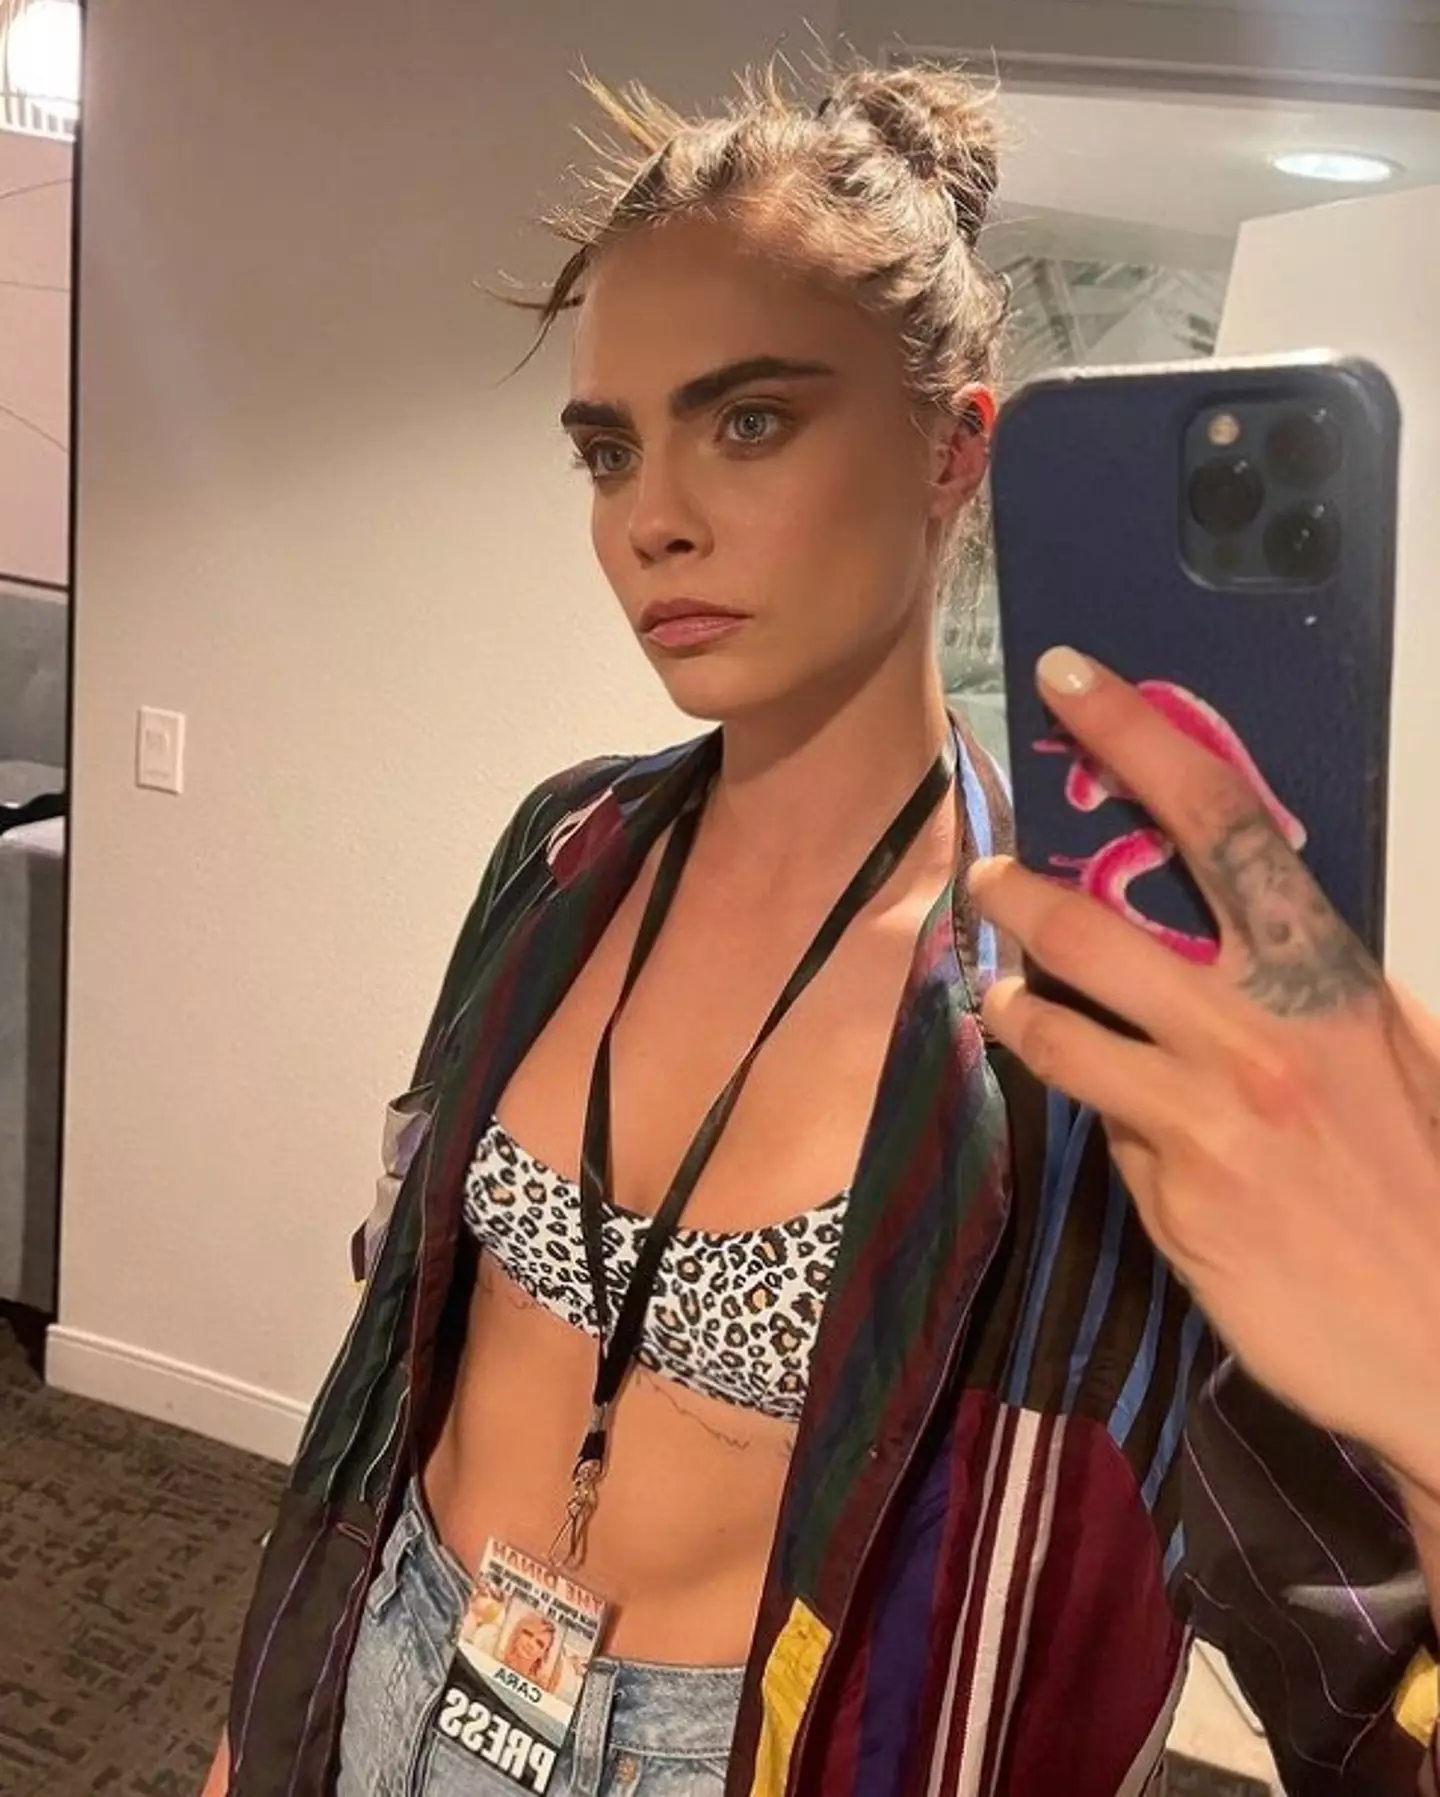 Delevingne has opened up about checking herself into rehab amid concerns she would have 'end up dead'.